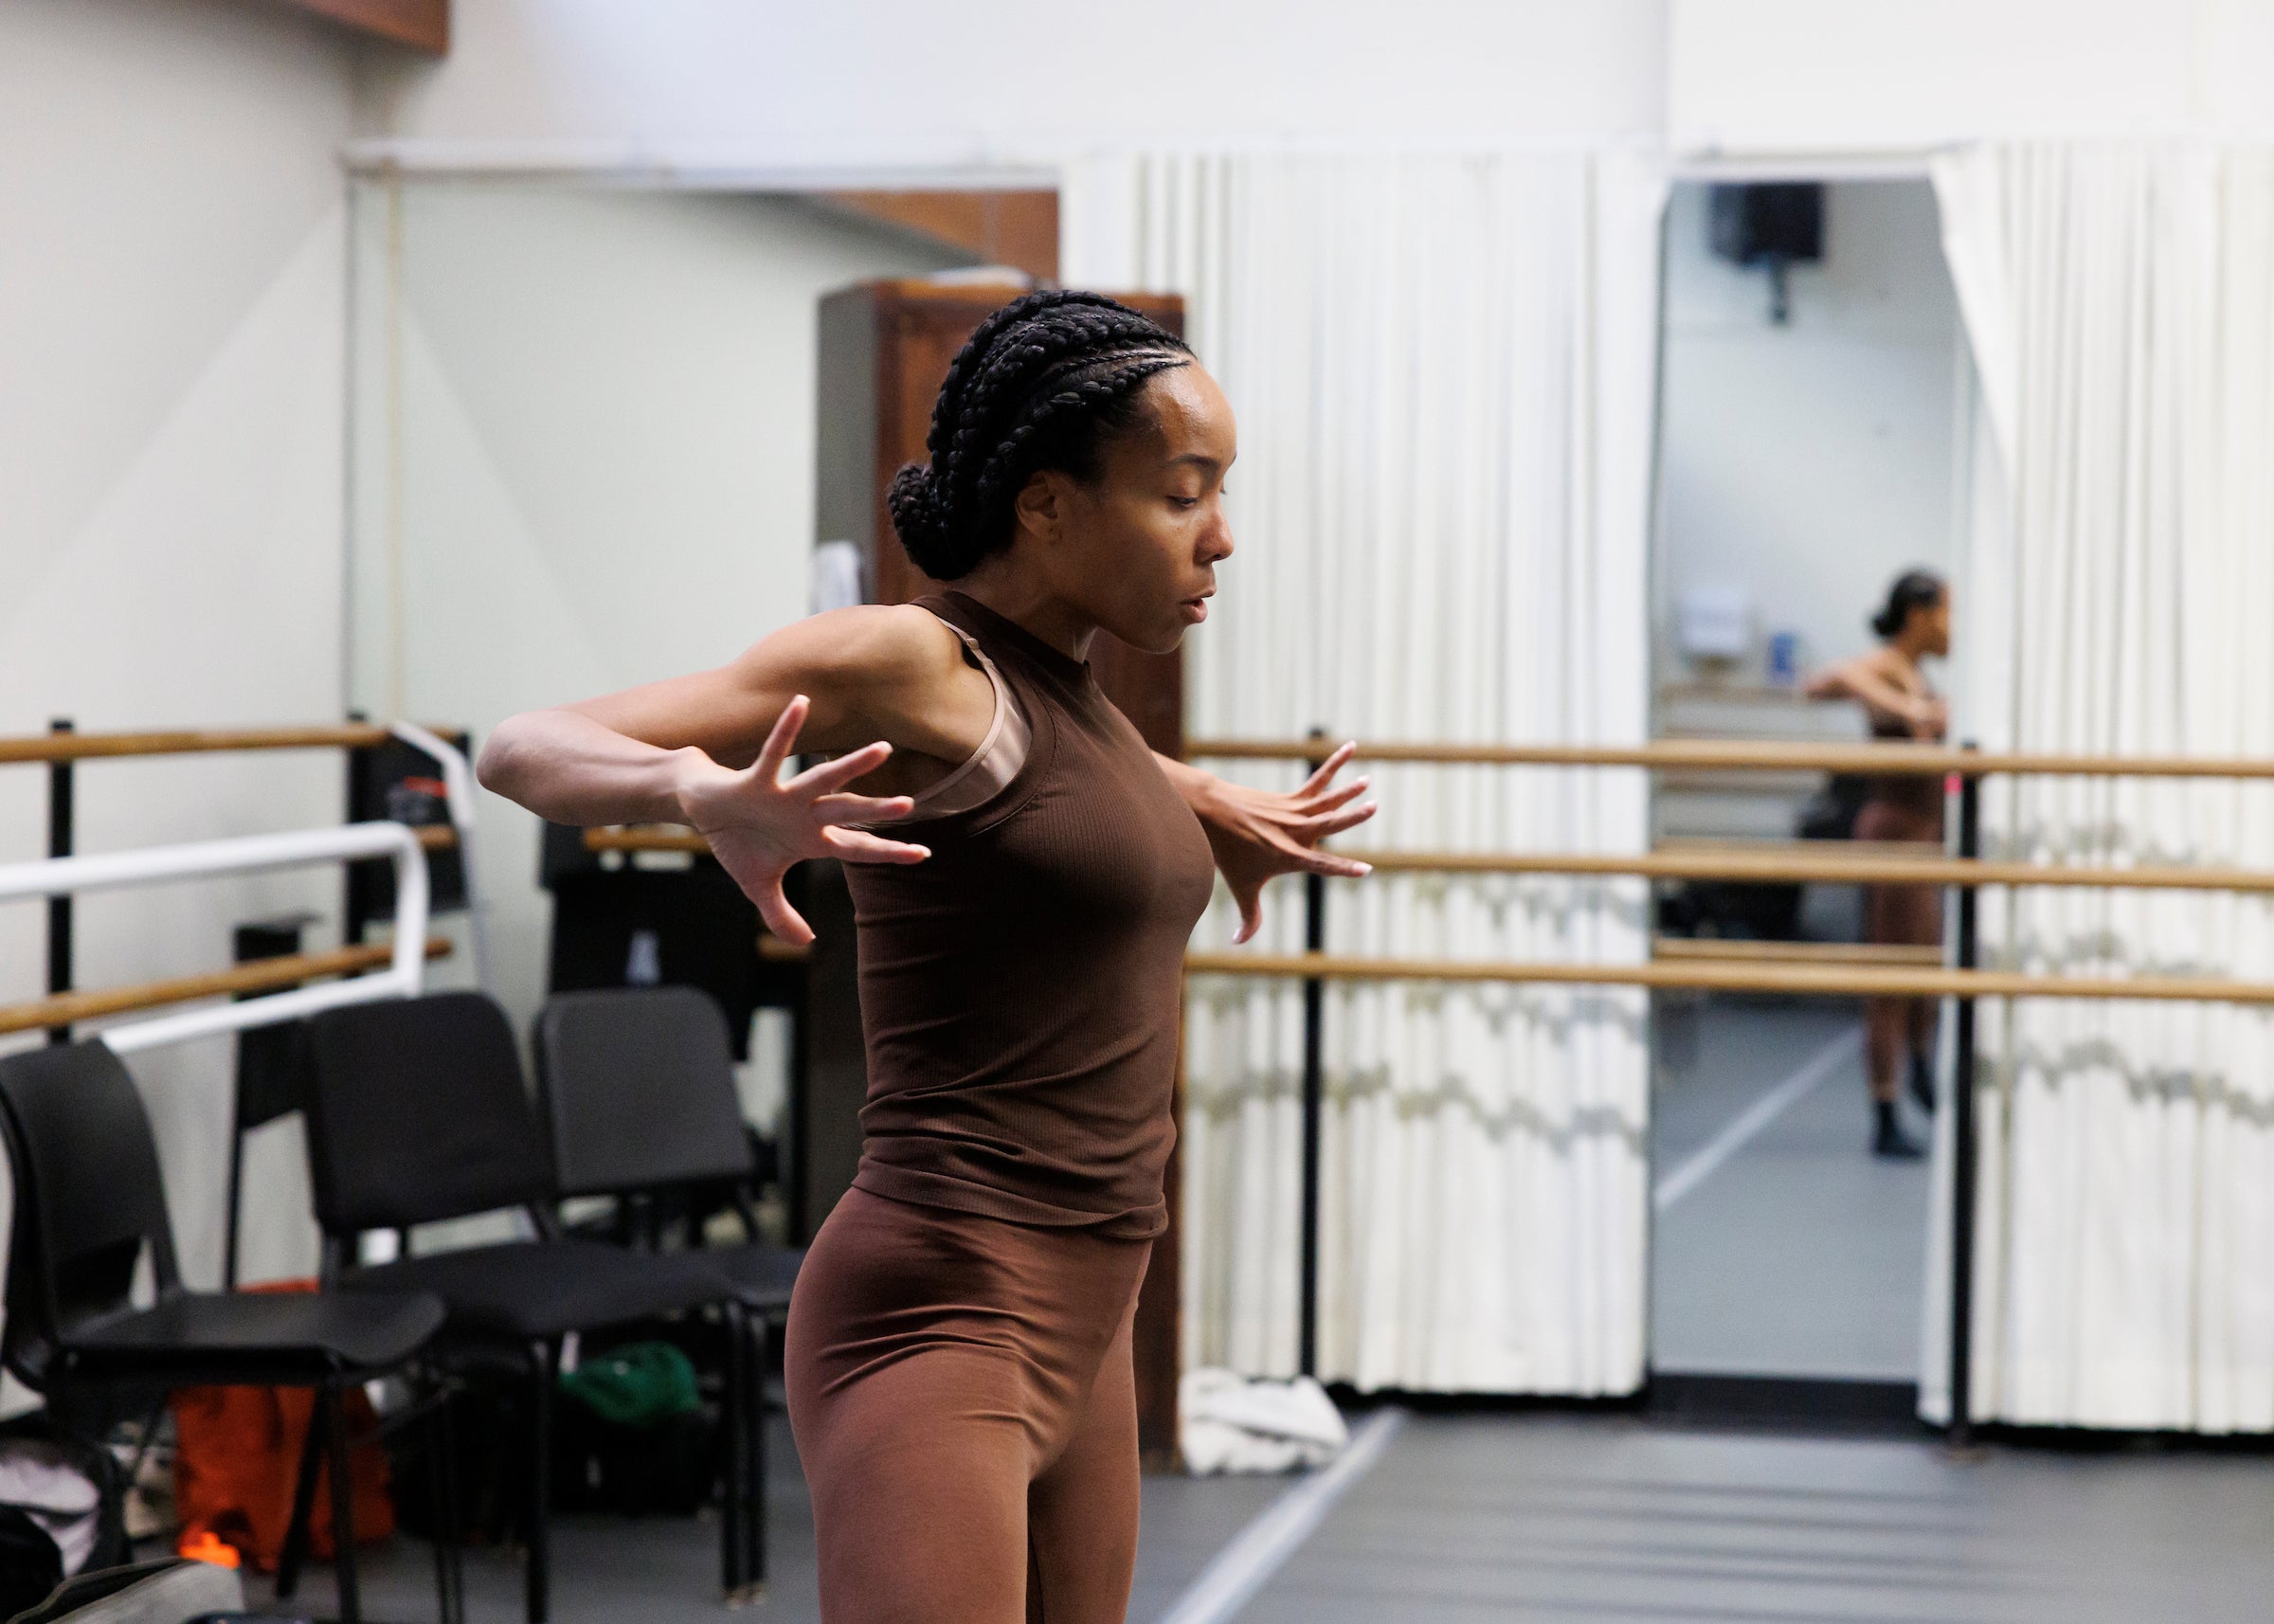 How Alicia Graf Mack And Sidra Bell Are Defining The Next Generation Of Dance